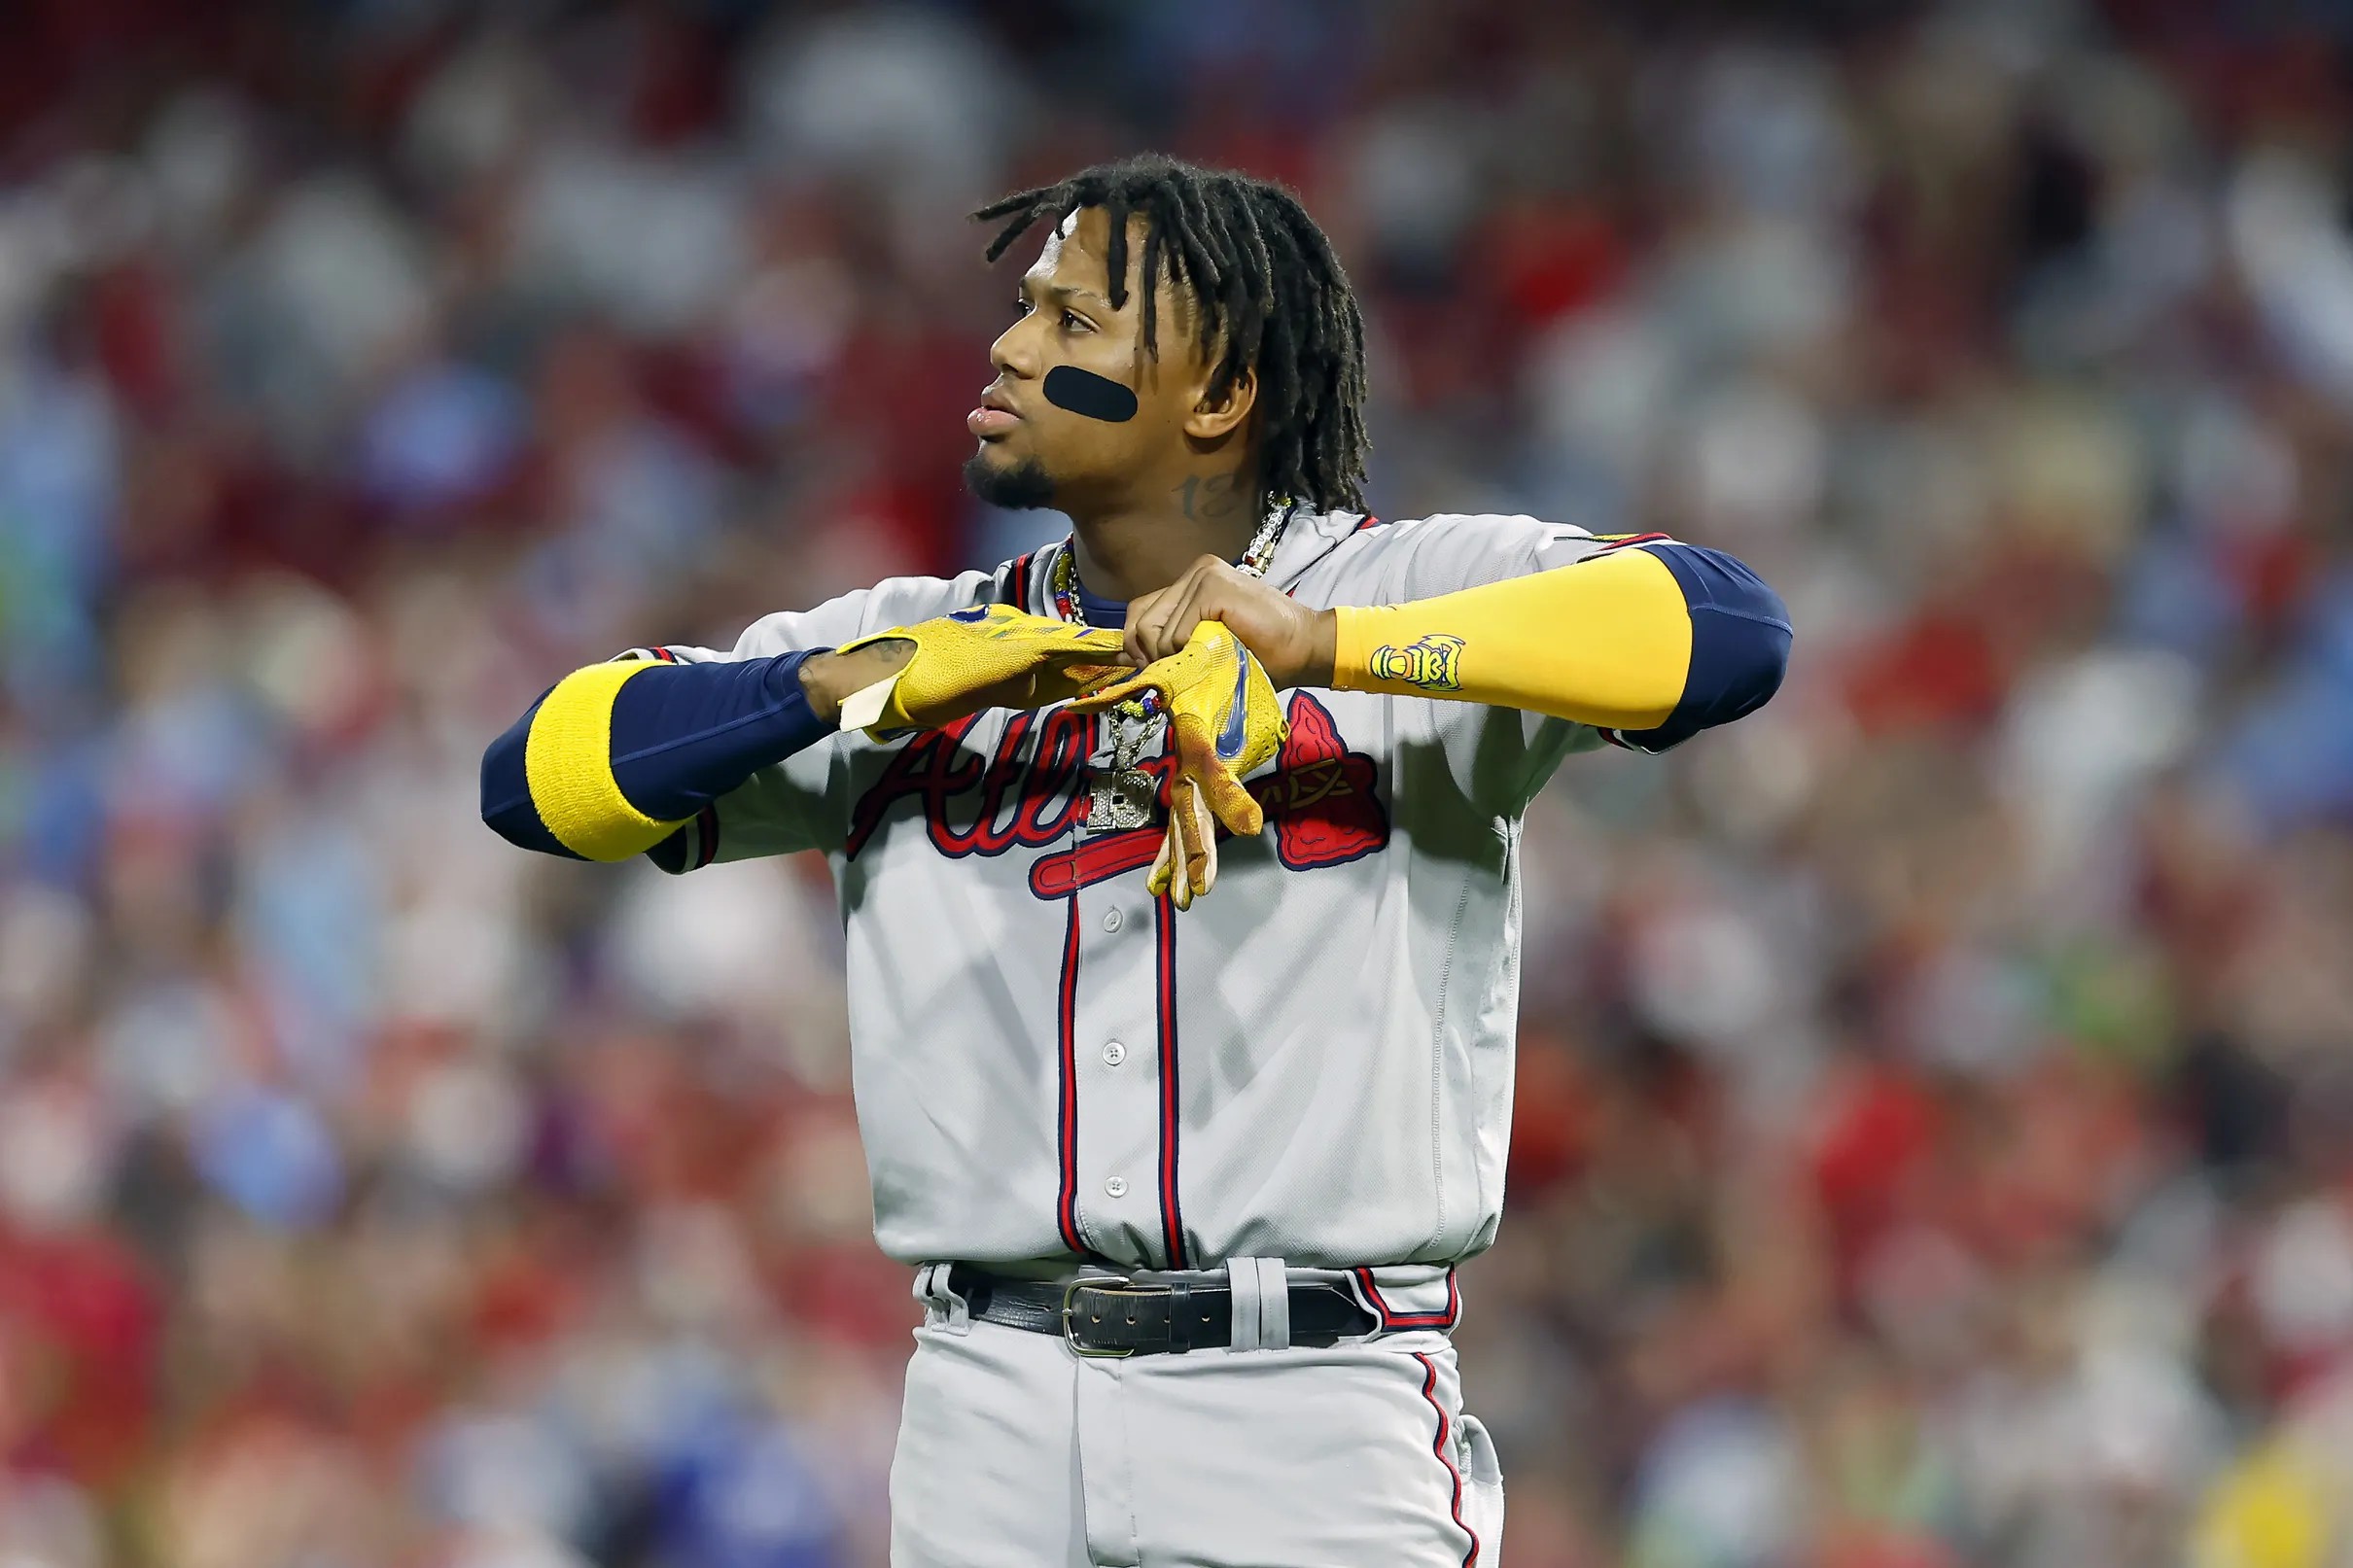 Braves' season ends with 3-1 loss to Phillies - Battery Power